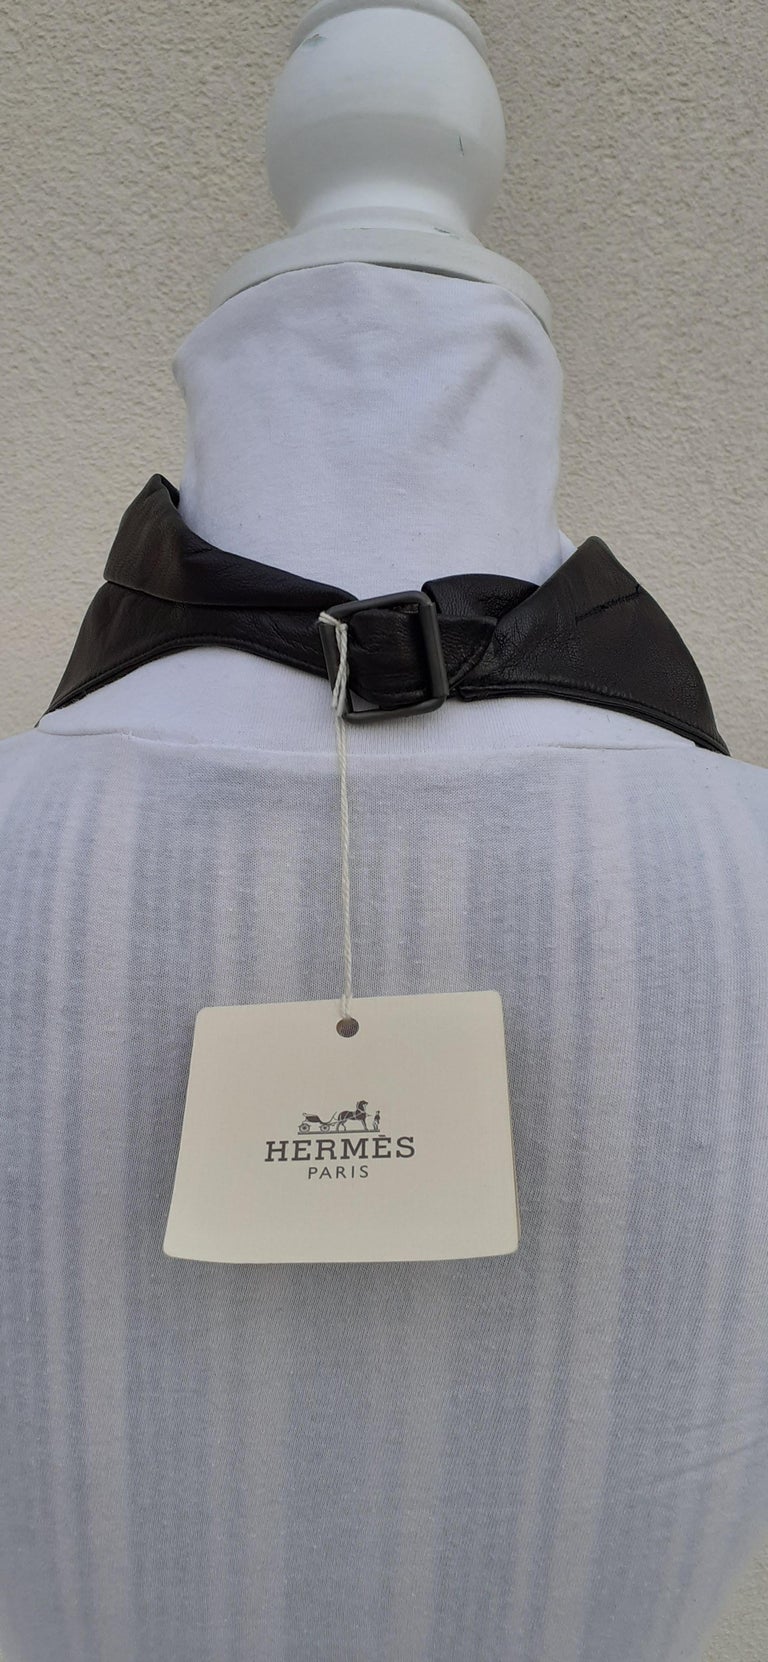 Exceptional Hermès Scarf Col Fichu Lambskin Leather Rodeo Bandana Texas RARE For Sale 1